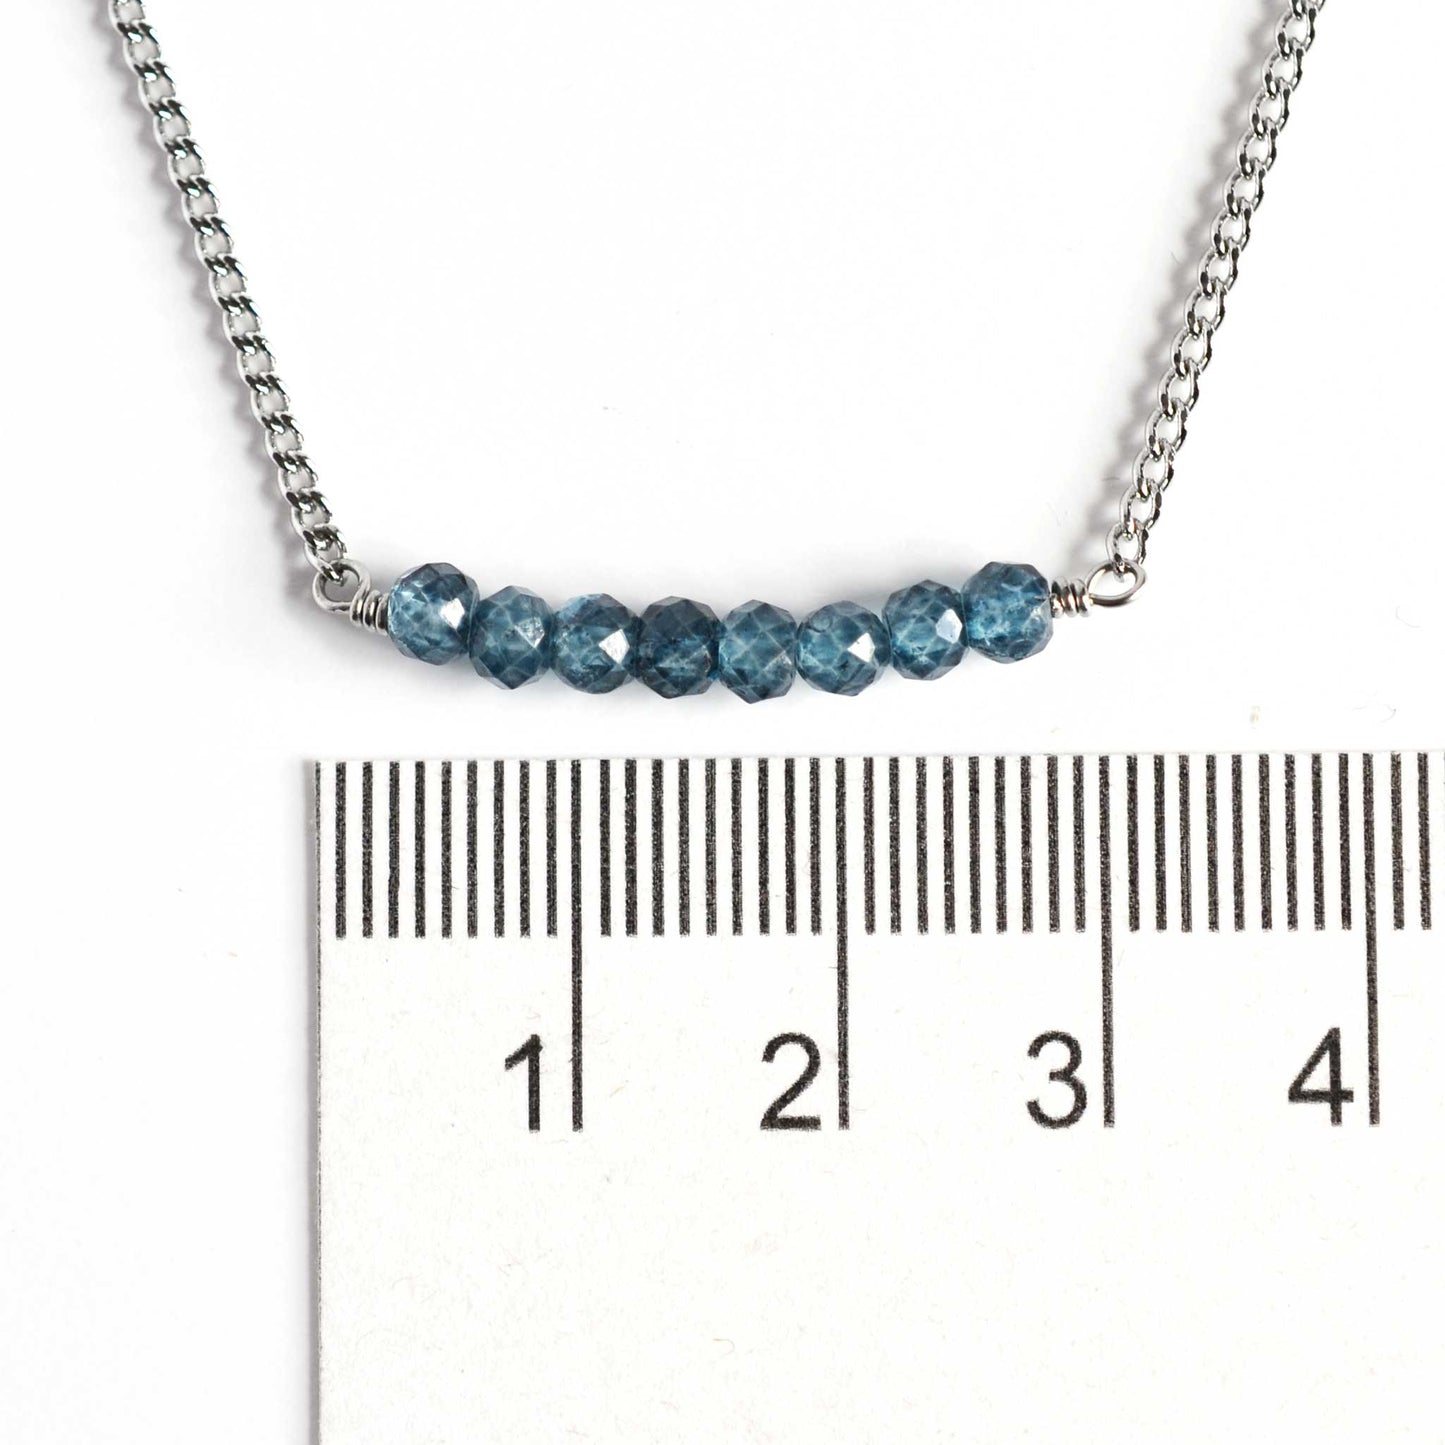 Dainty blue Topaz necklace with 4mm gemstone beads next to ruler